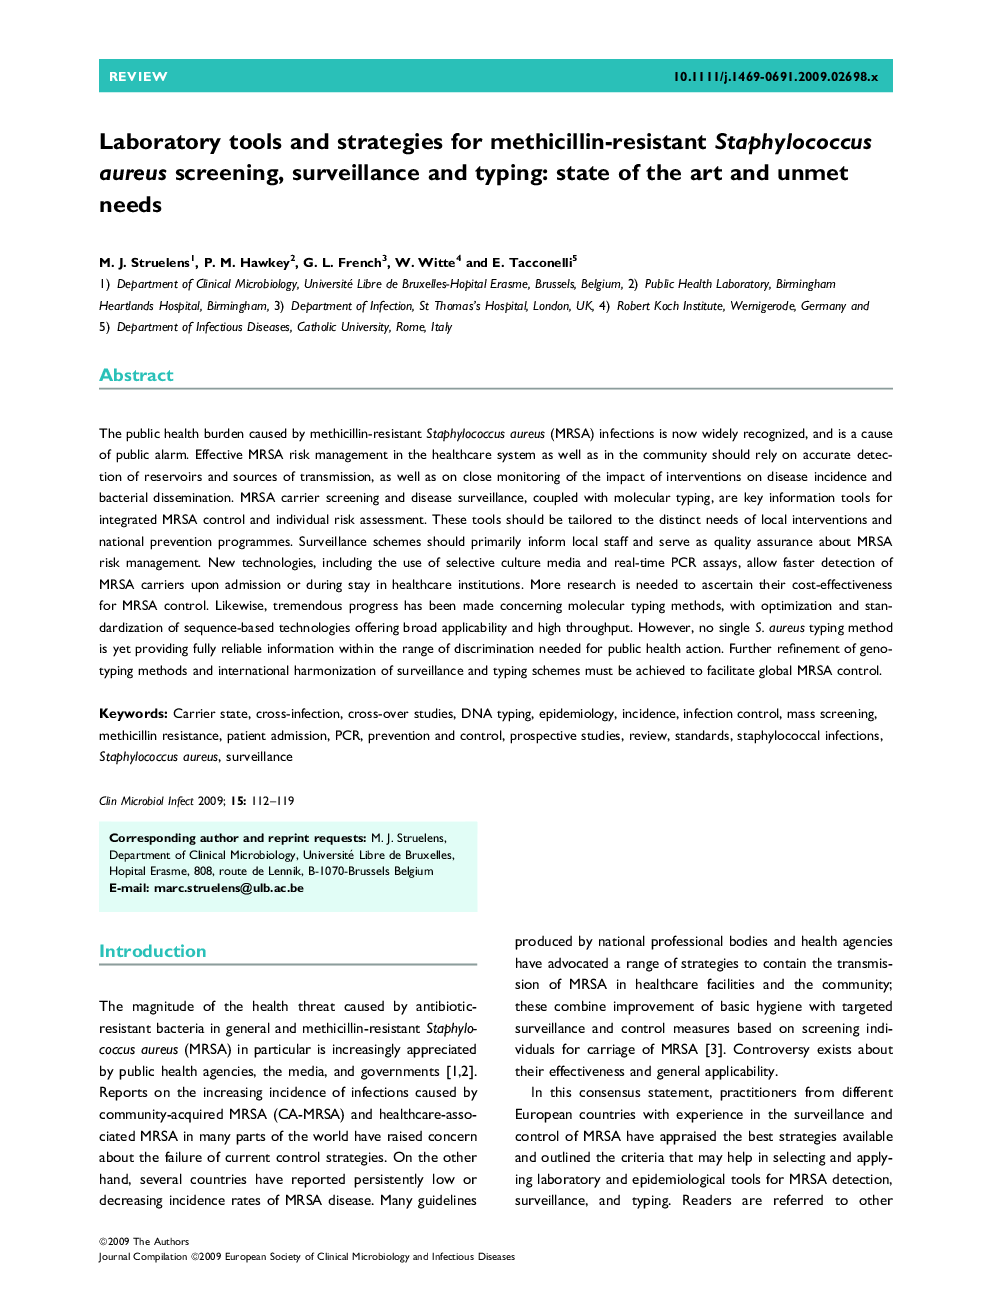 Laboratory tools and strategies for methicillin-resistant Staphylococcus aureus screening, surveillance and typing: state of the art and unmet needs